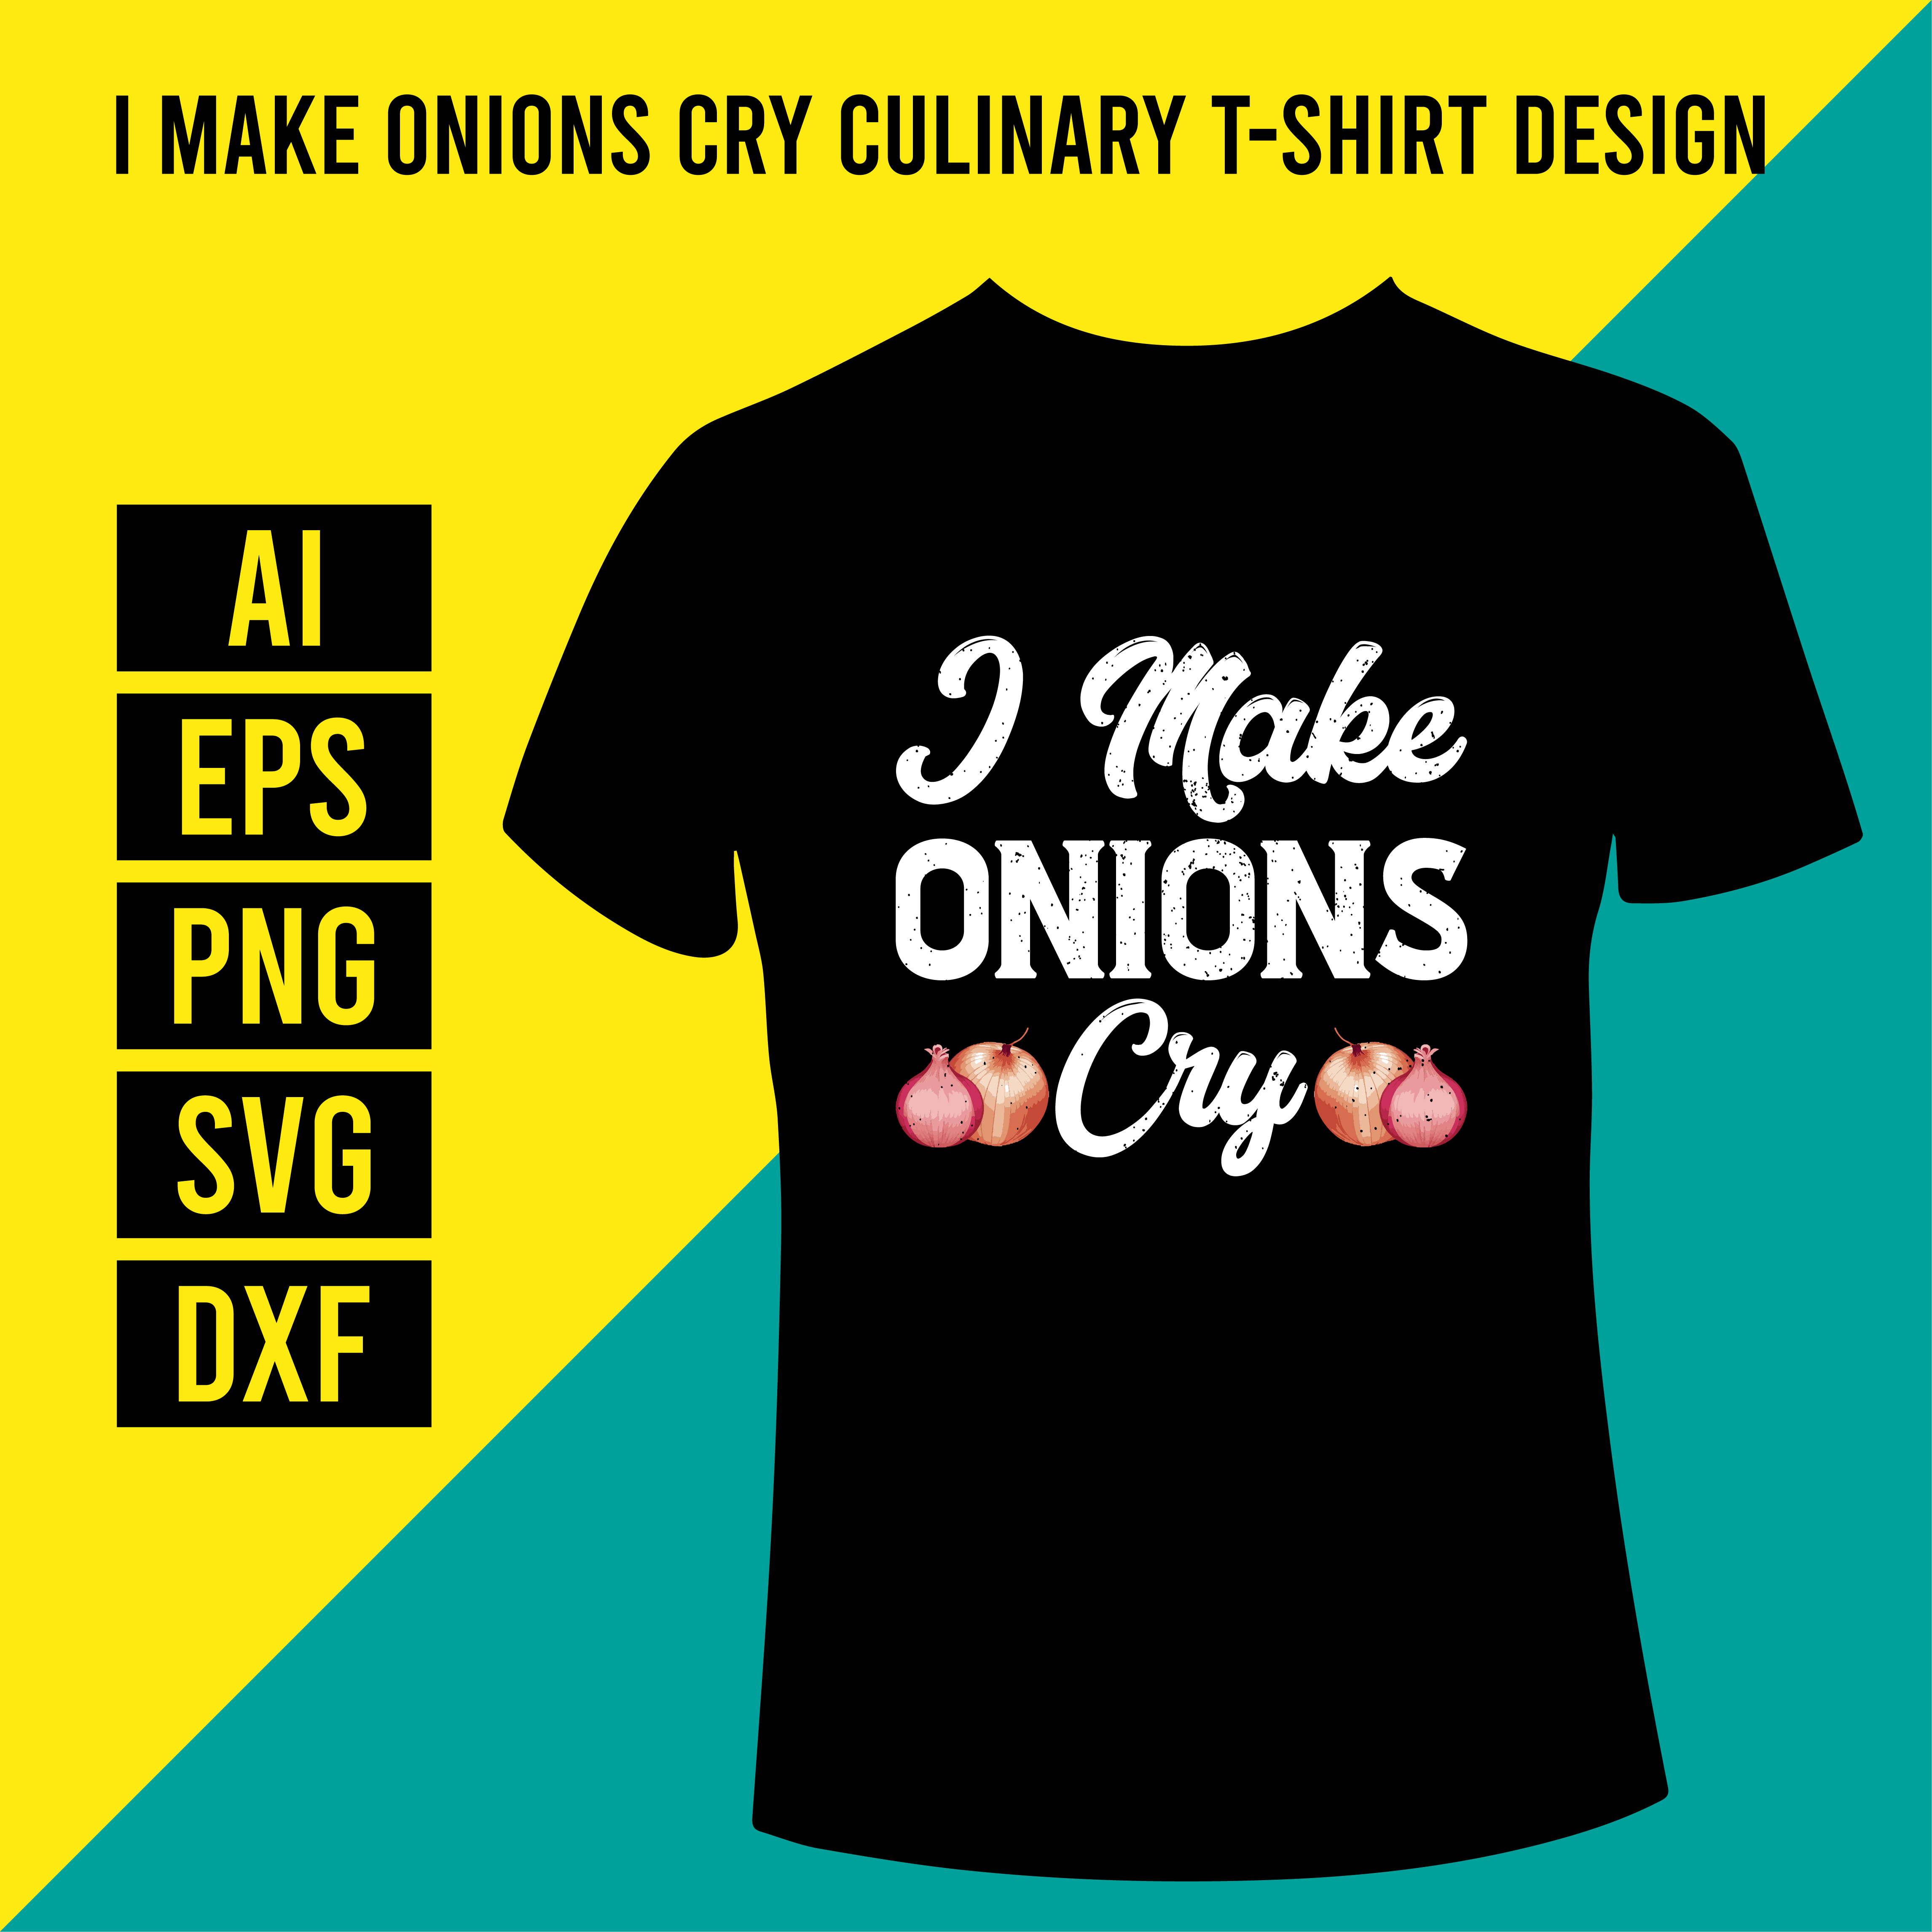 I Make Onions Cry Culinary T-Shirt Design cover image.